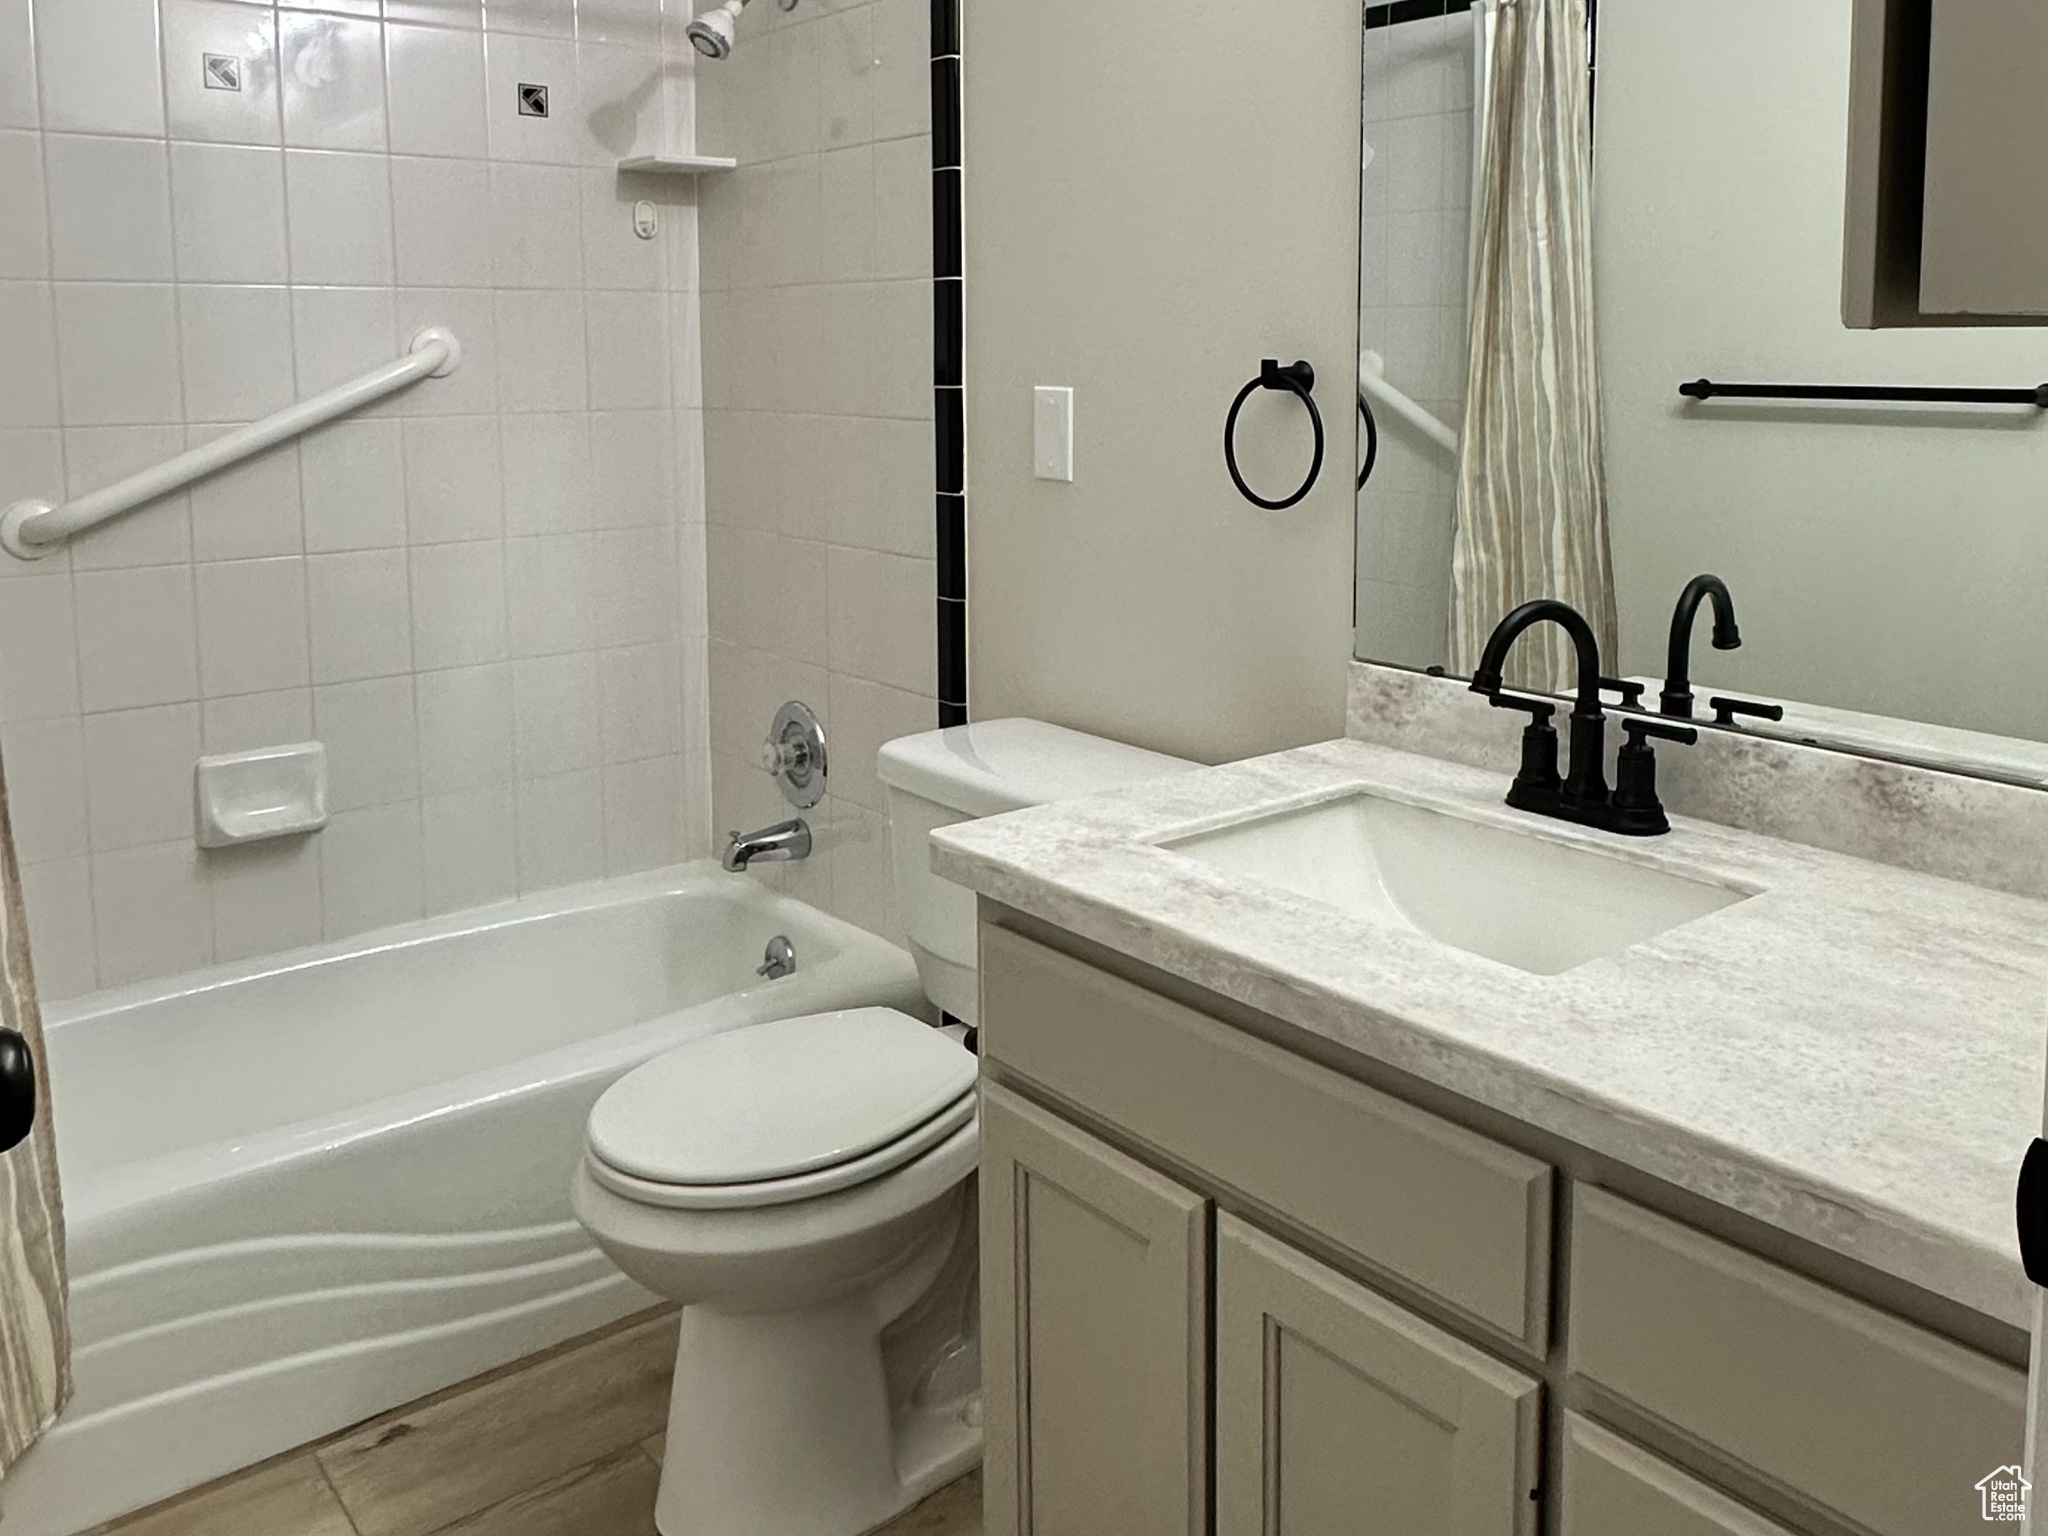 Full bathroom with oversized vanity, toilet, shower / bathtub combination with curtain, and hardwood / wood-style flooring